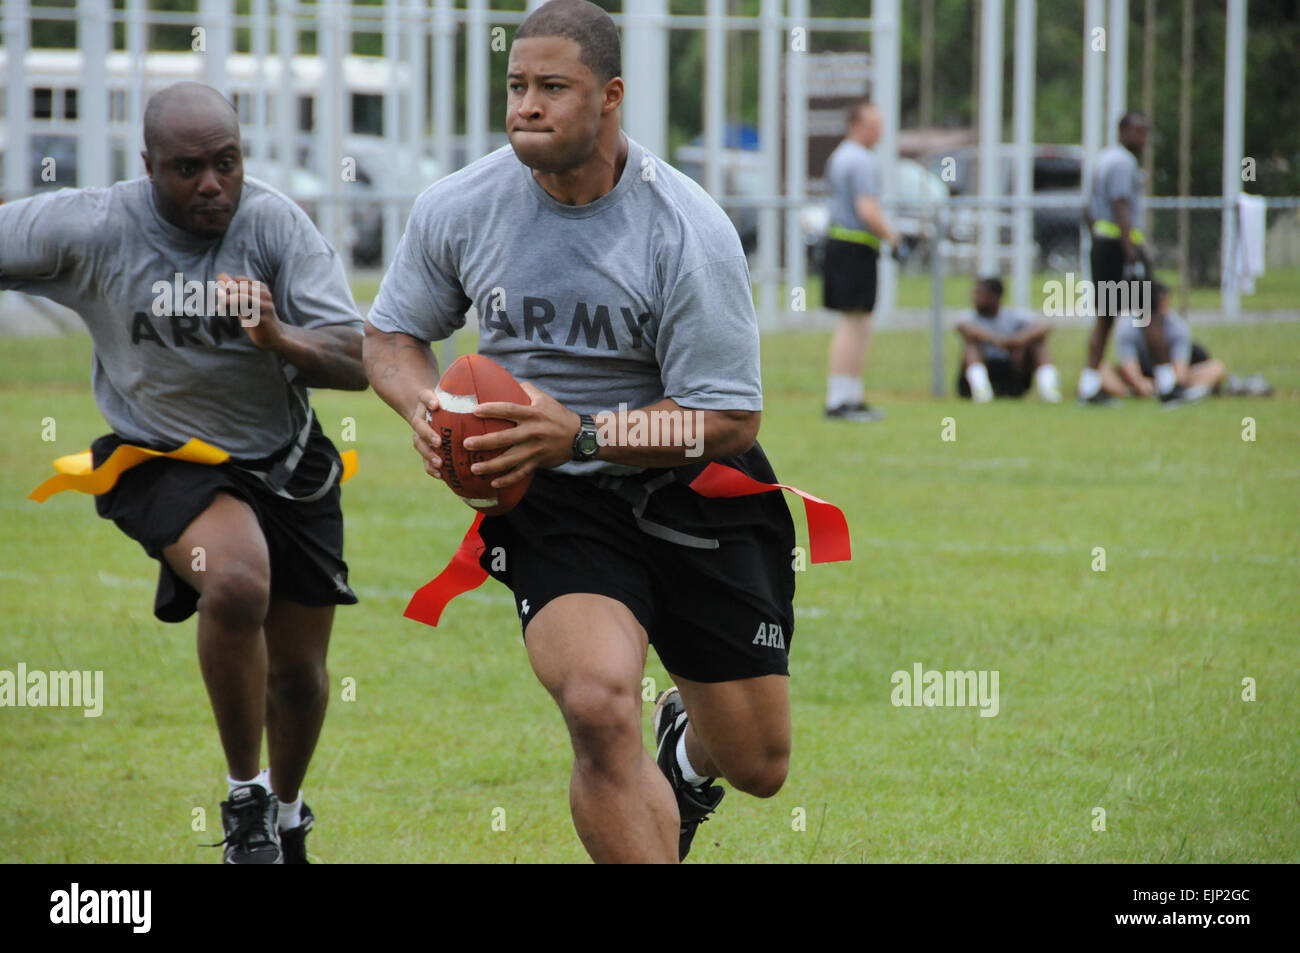 Staff Sgt. Jacob Hairston, with Headquarters and Headquarters Battery, 1st Battalion, 76th Field Artillery Regiment, 4th Infantry Brigade Combat Team, 3rd Infantry Division takes part in a flag football game, June 25, as part of Marne Week at Fort Stewart, Ga.  Staff Sgt. Tanya Polk Stock Photo